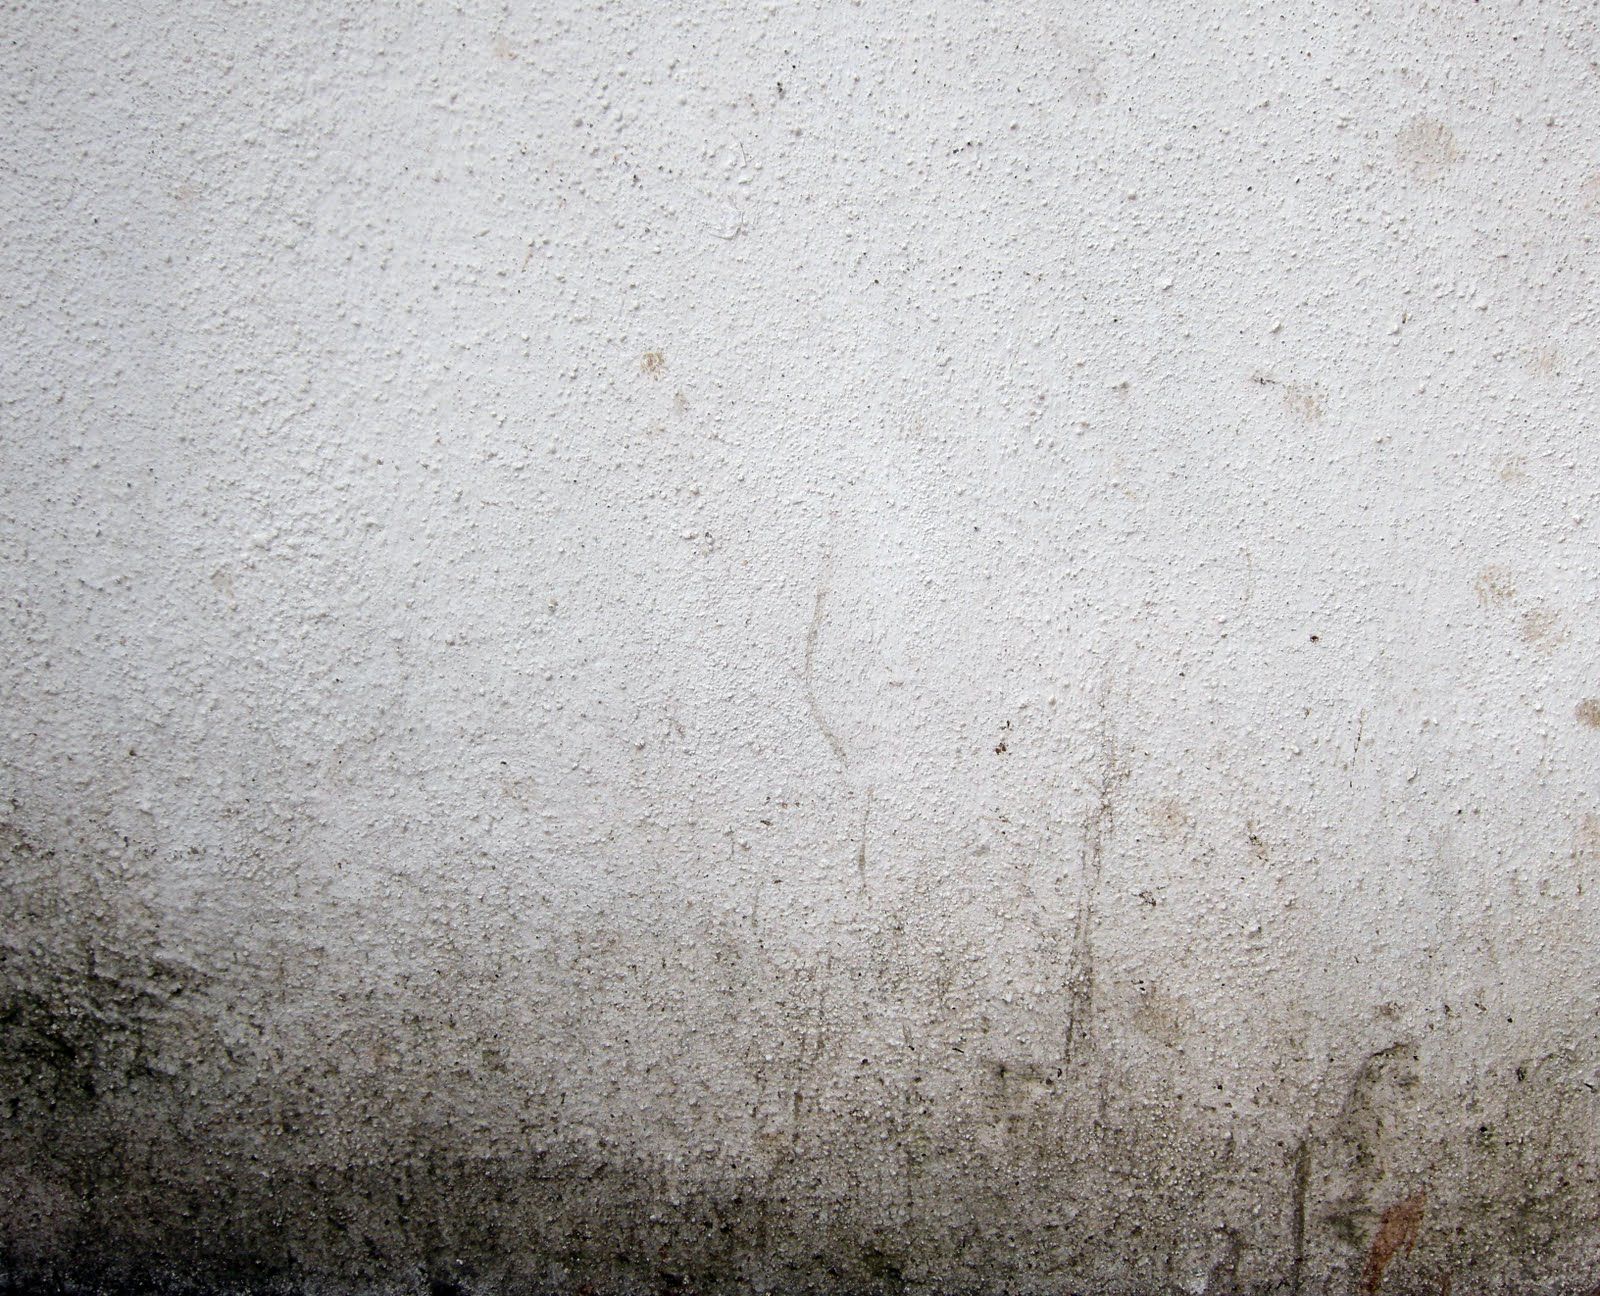 Dirty White Wall Texture Plaster and stucco wall leaves | Babaimage ...